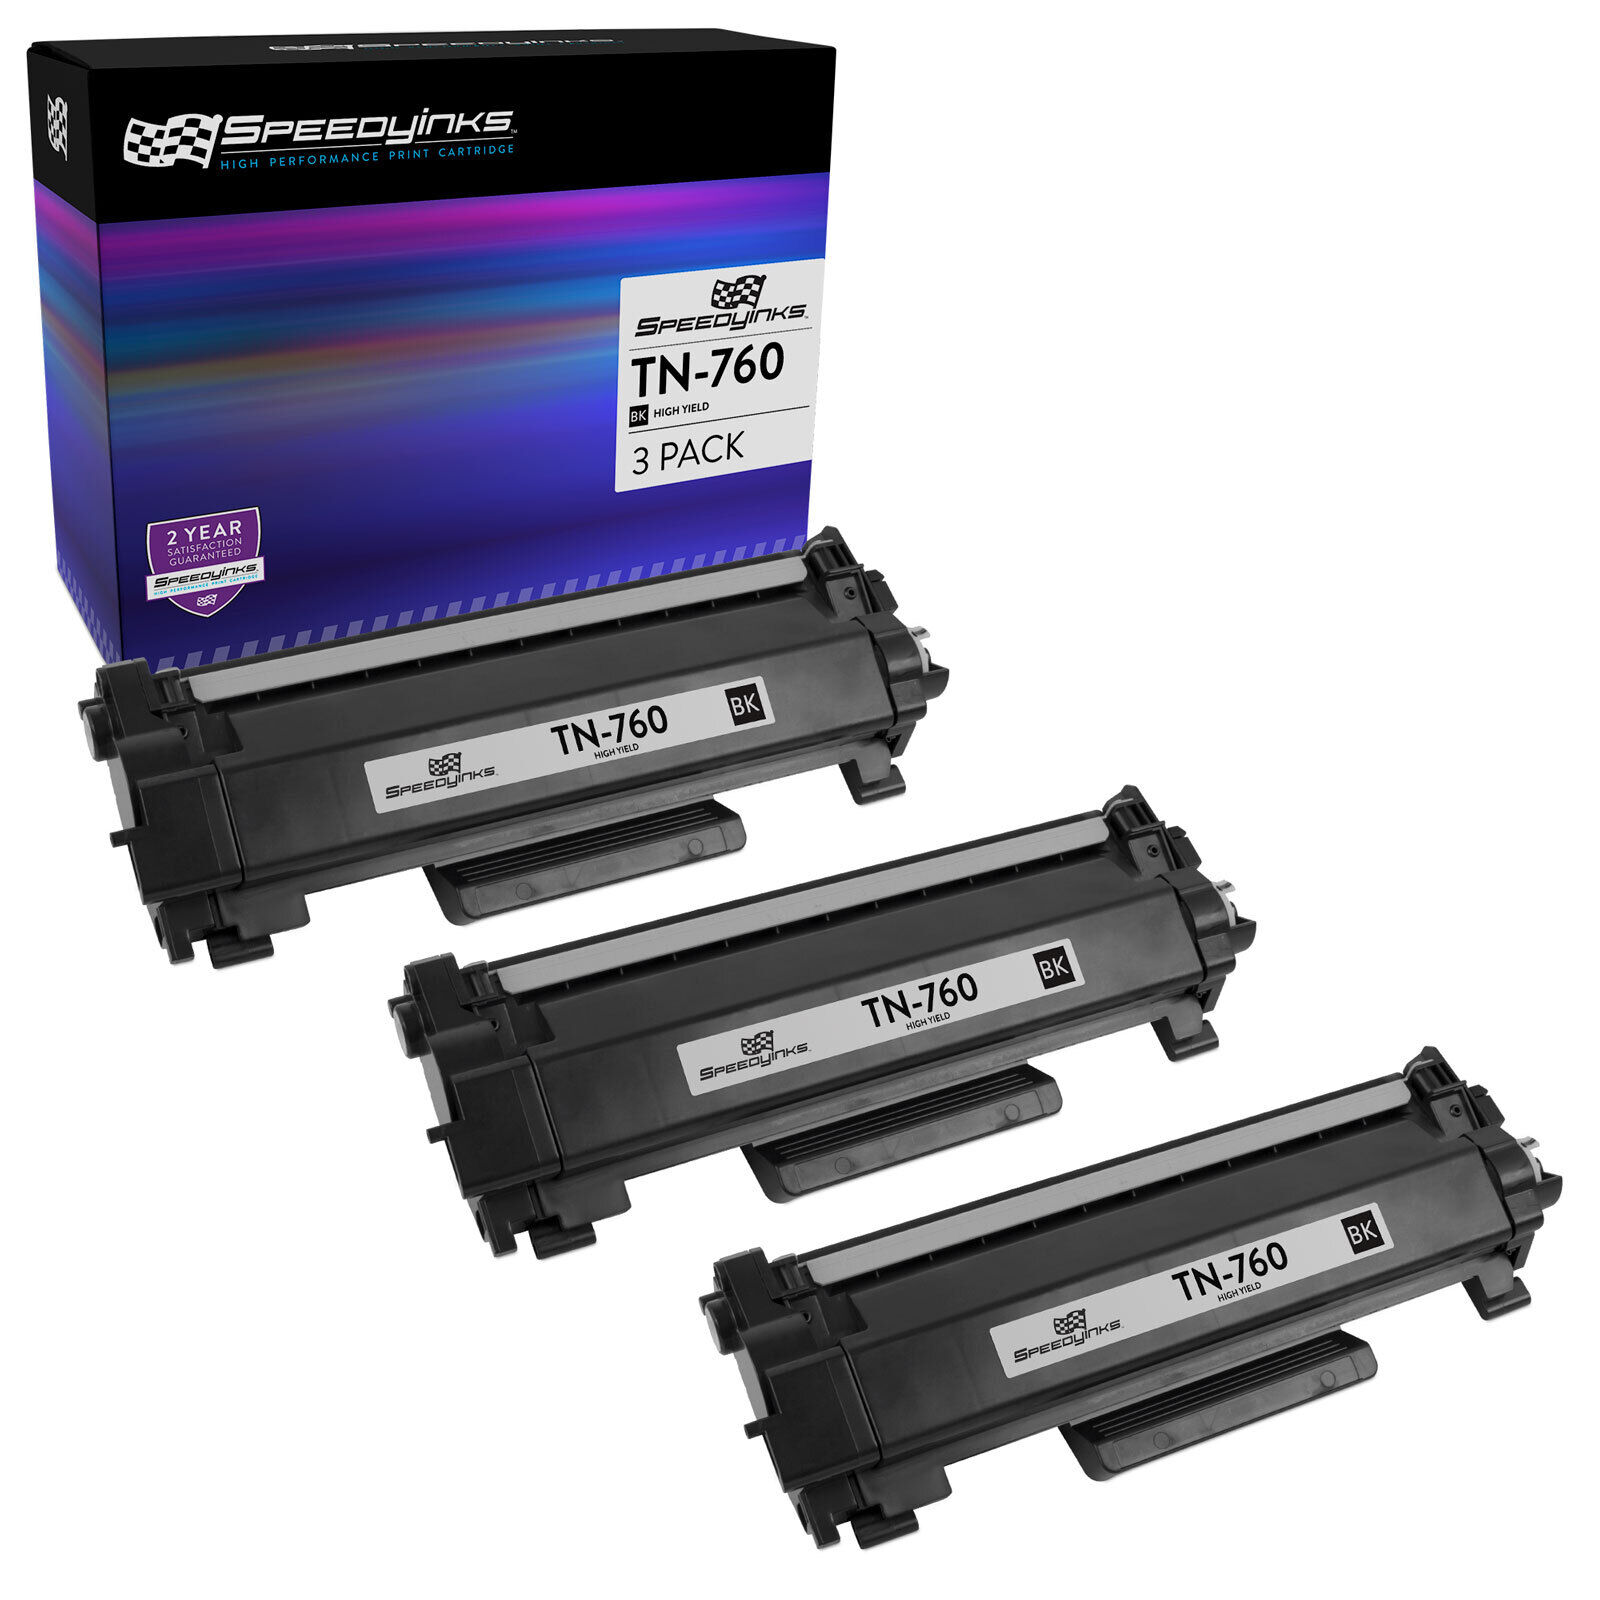 SPEEDYINKS 3PK Replacement for Brother TN760 TN-760 HY Black Toner Cartridges